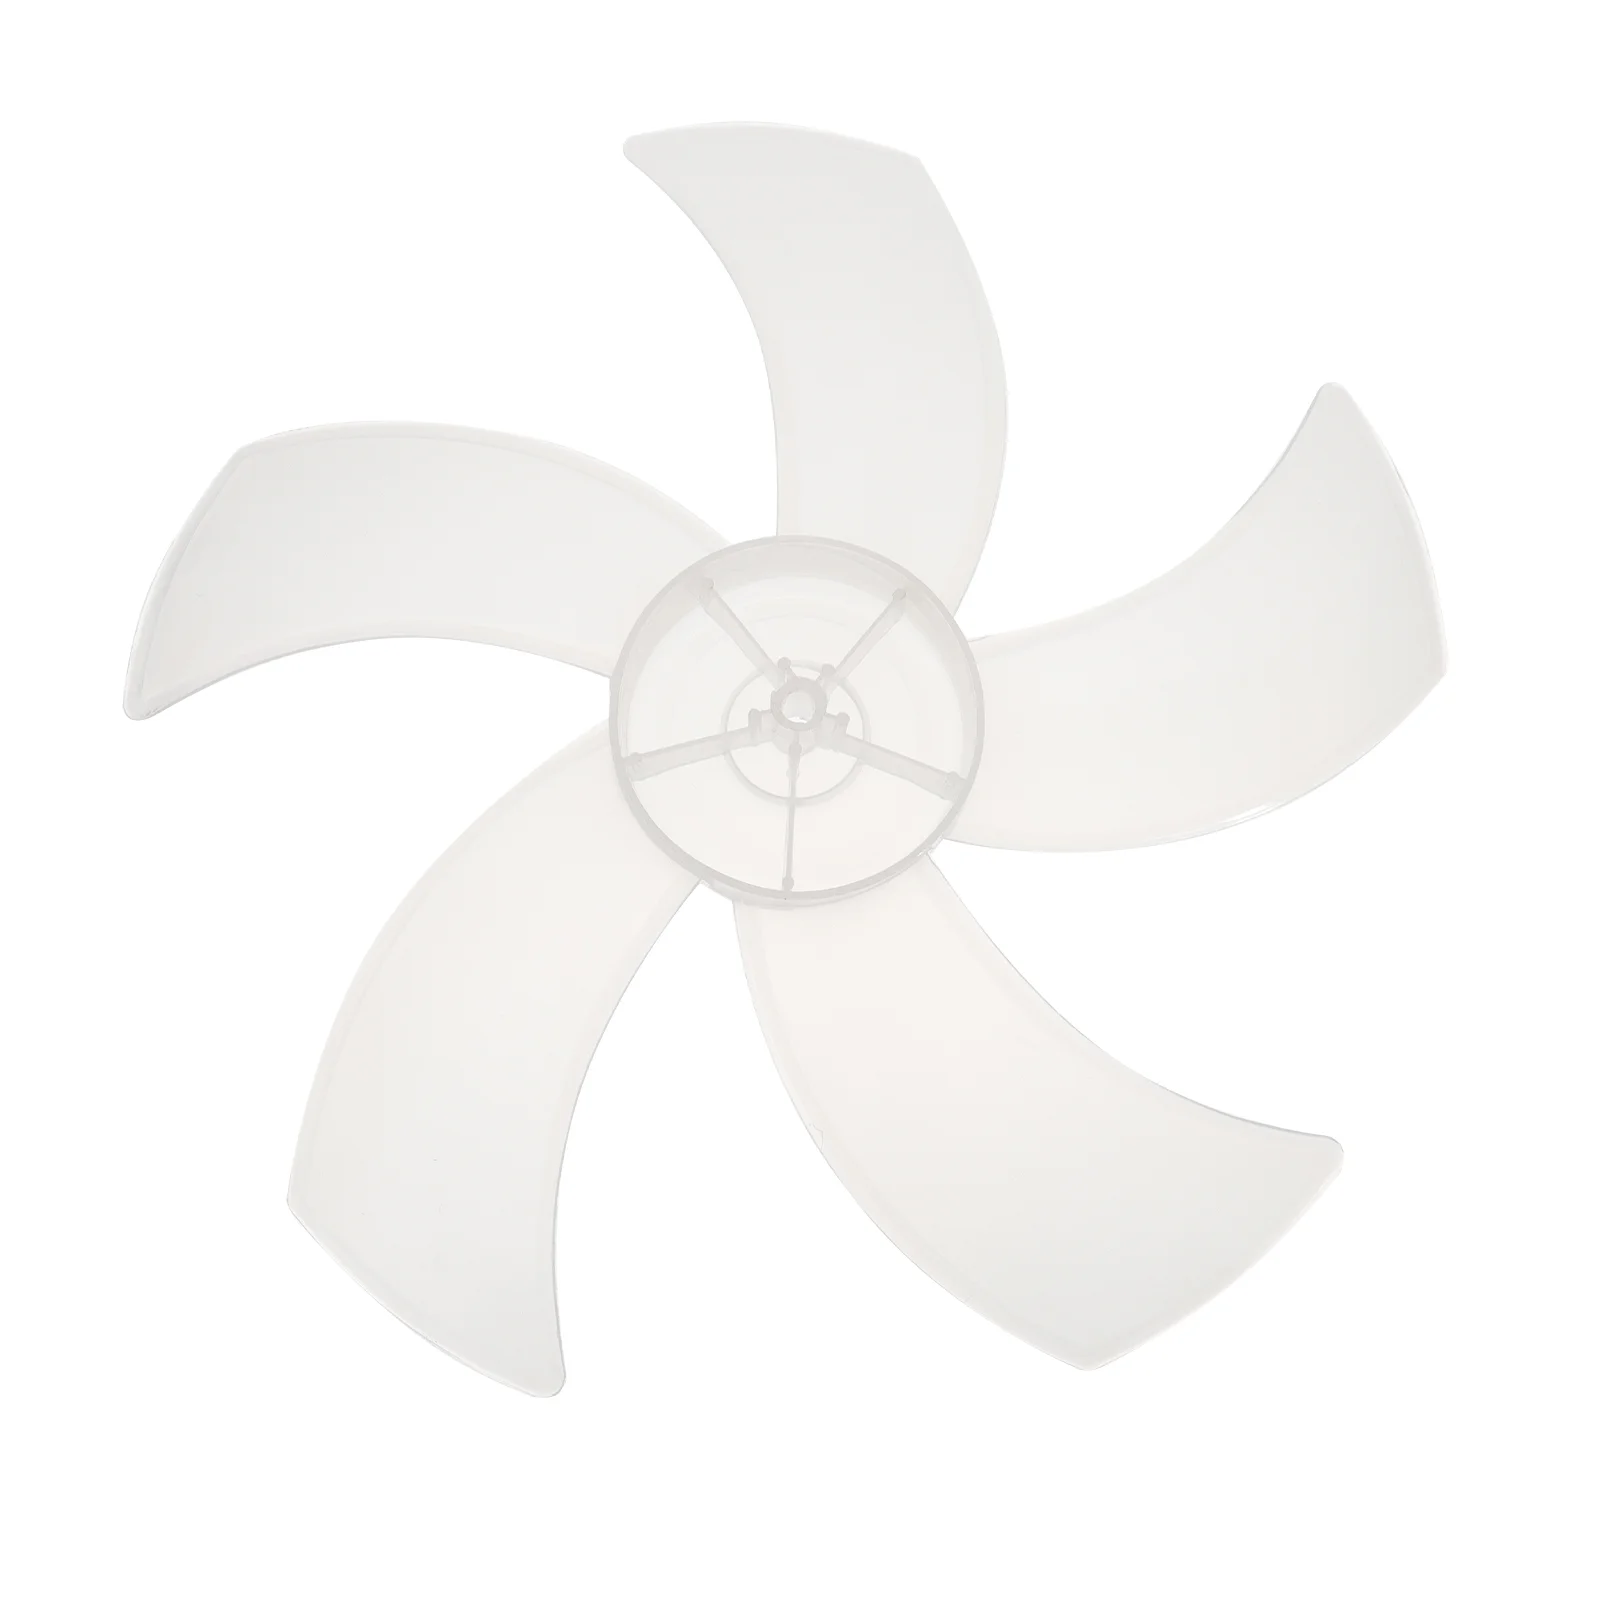 

2 Pcs Wind Replacement Fan Blades Accessory Ceiling Creative Universal Substitution Plastic Useful